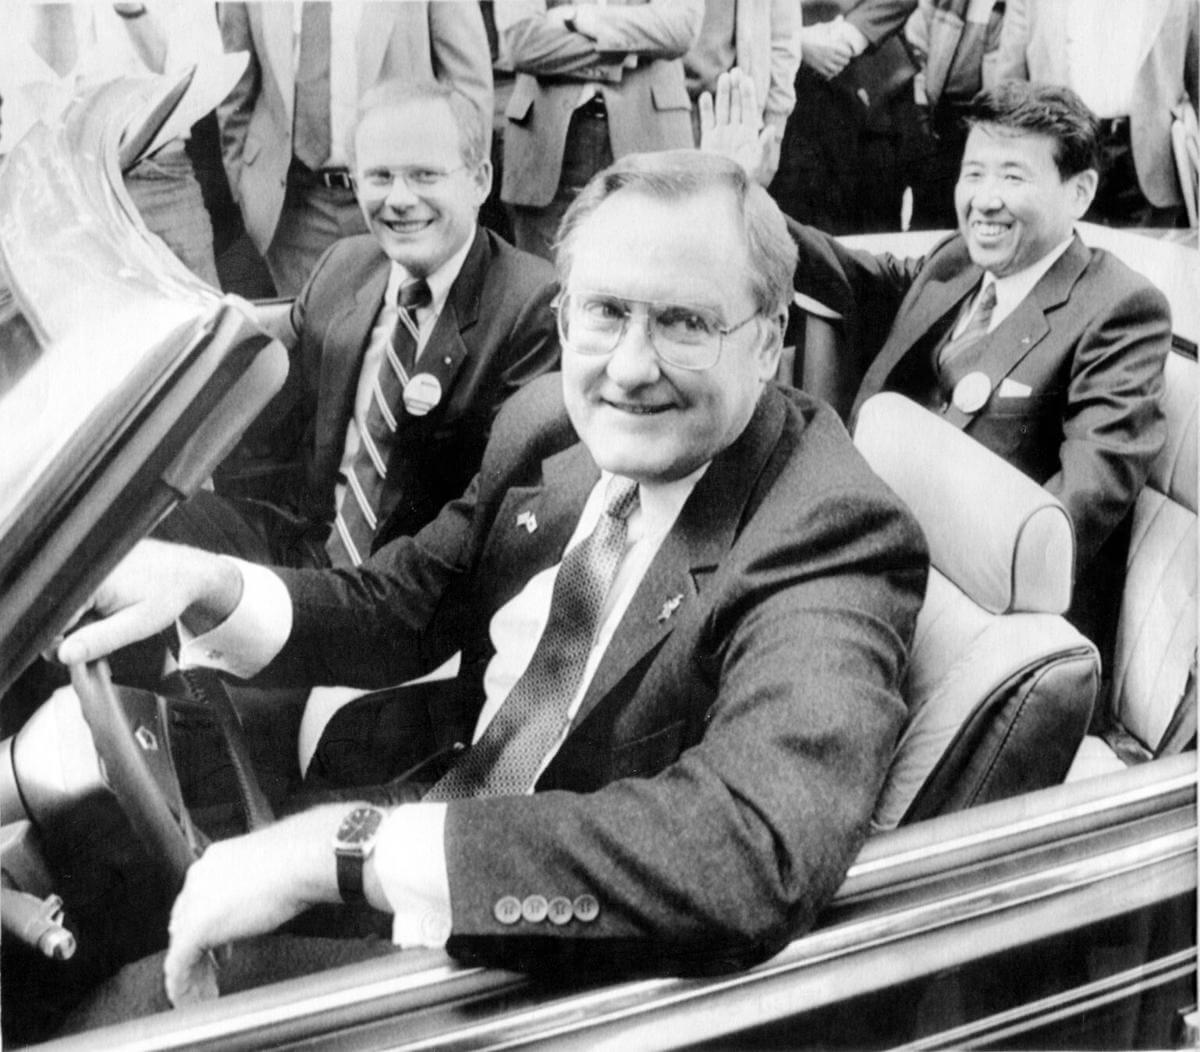 Governor Thompson in car during parade